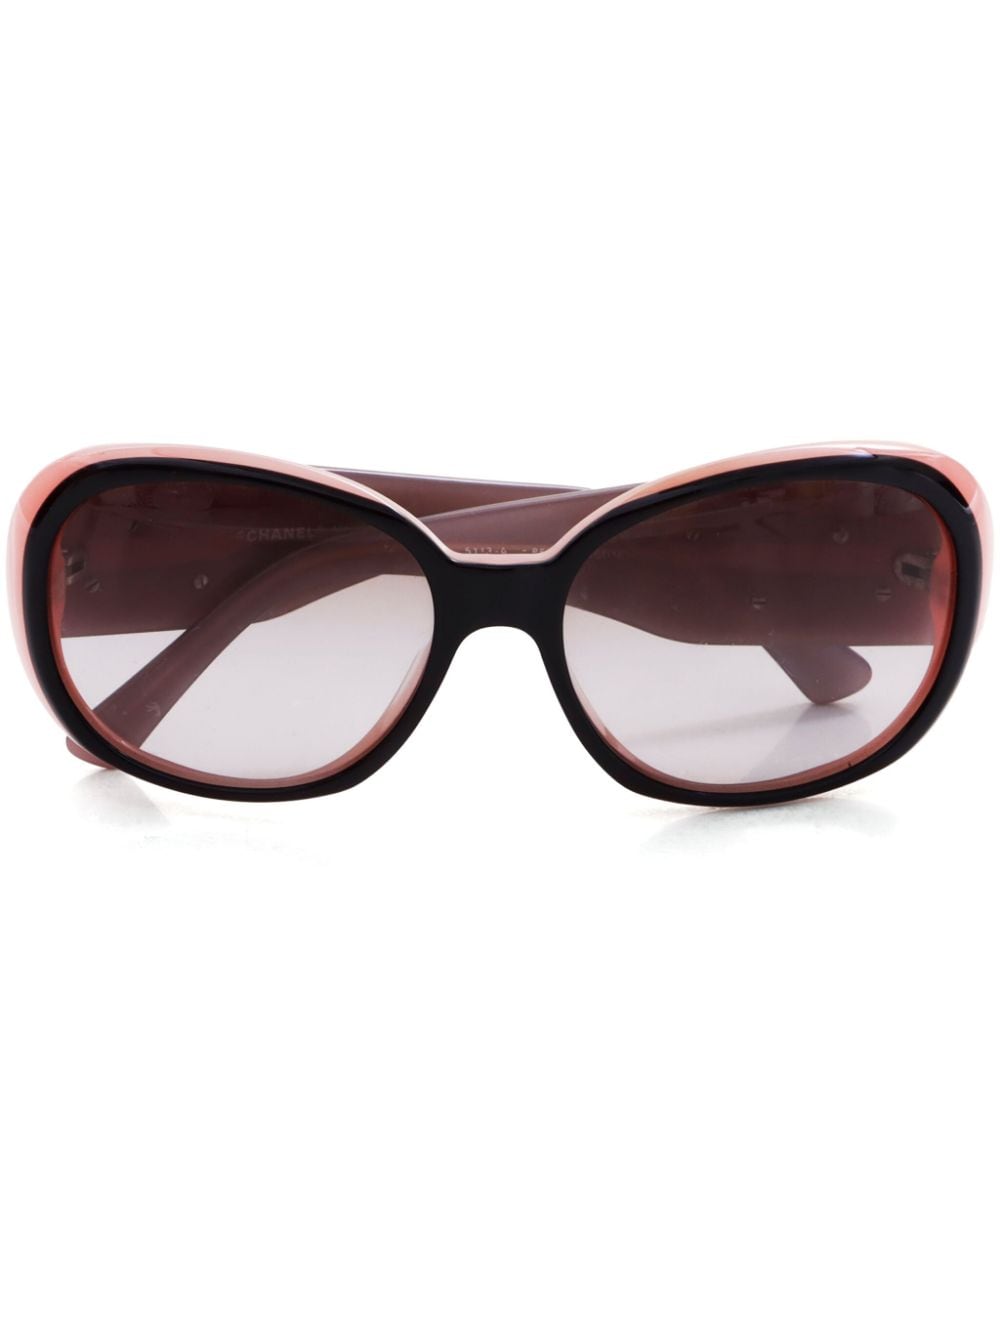 CHANEL Pre-Owned 2000s oval-framed gradient sunglasses - Pink